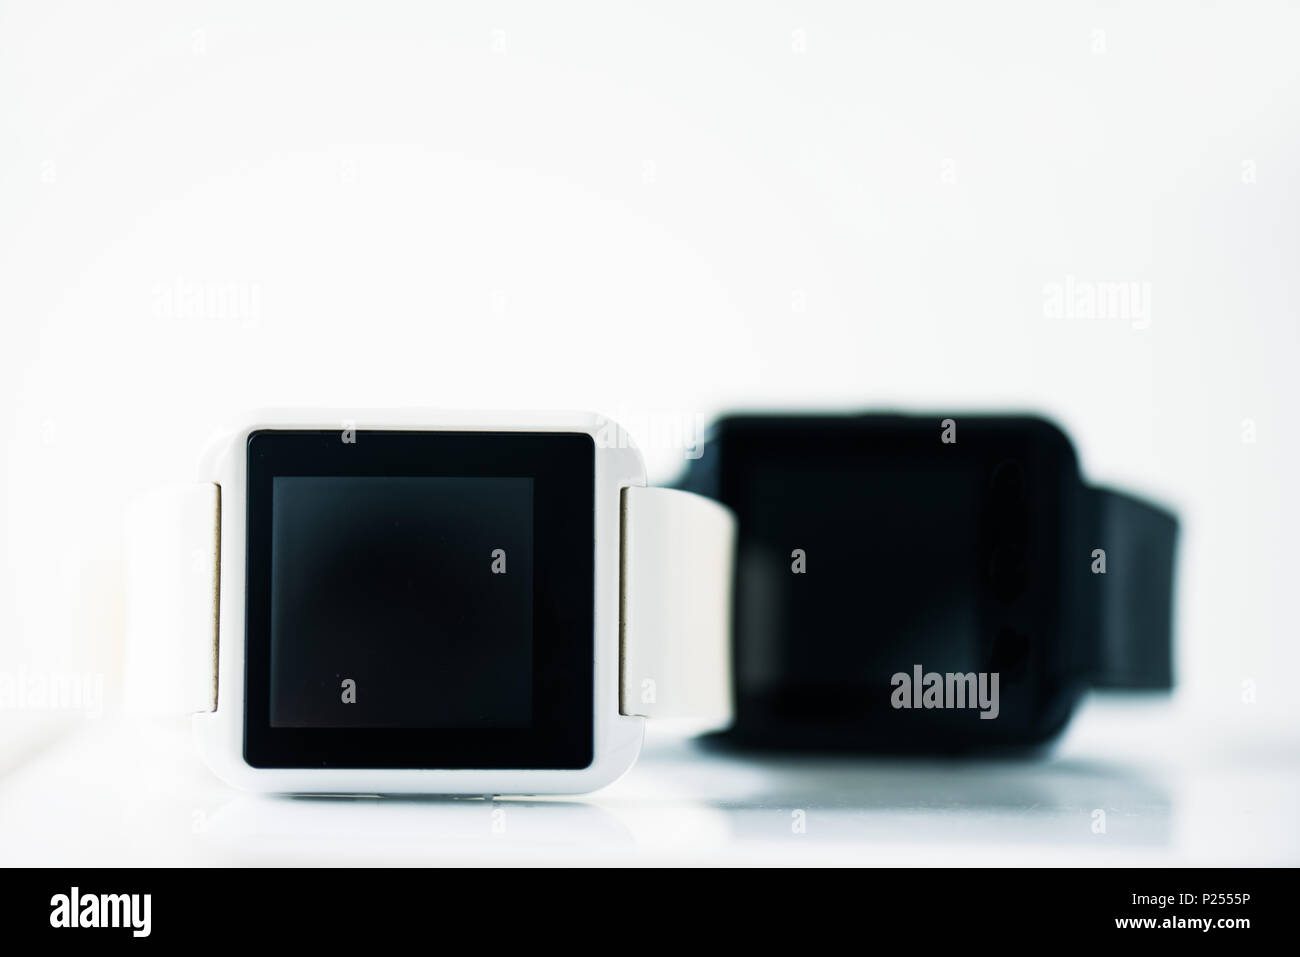 close-up view of smartwatches with black screens on grey Stock Photo